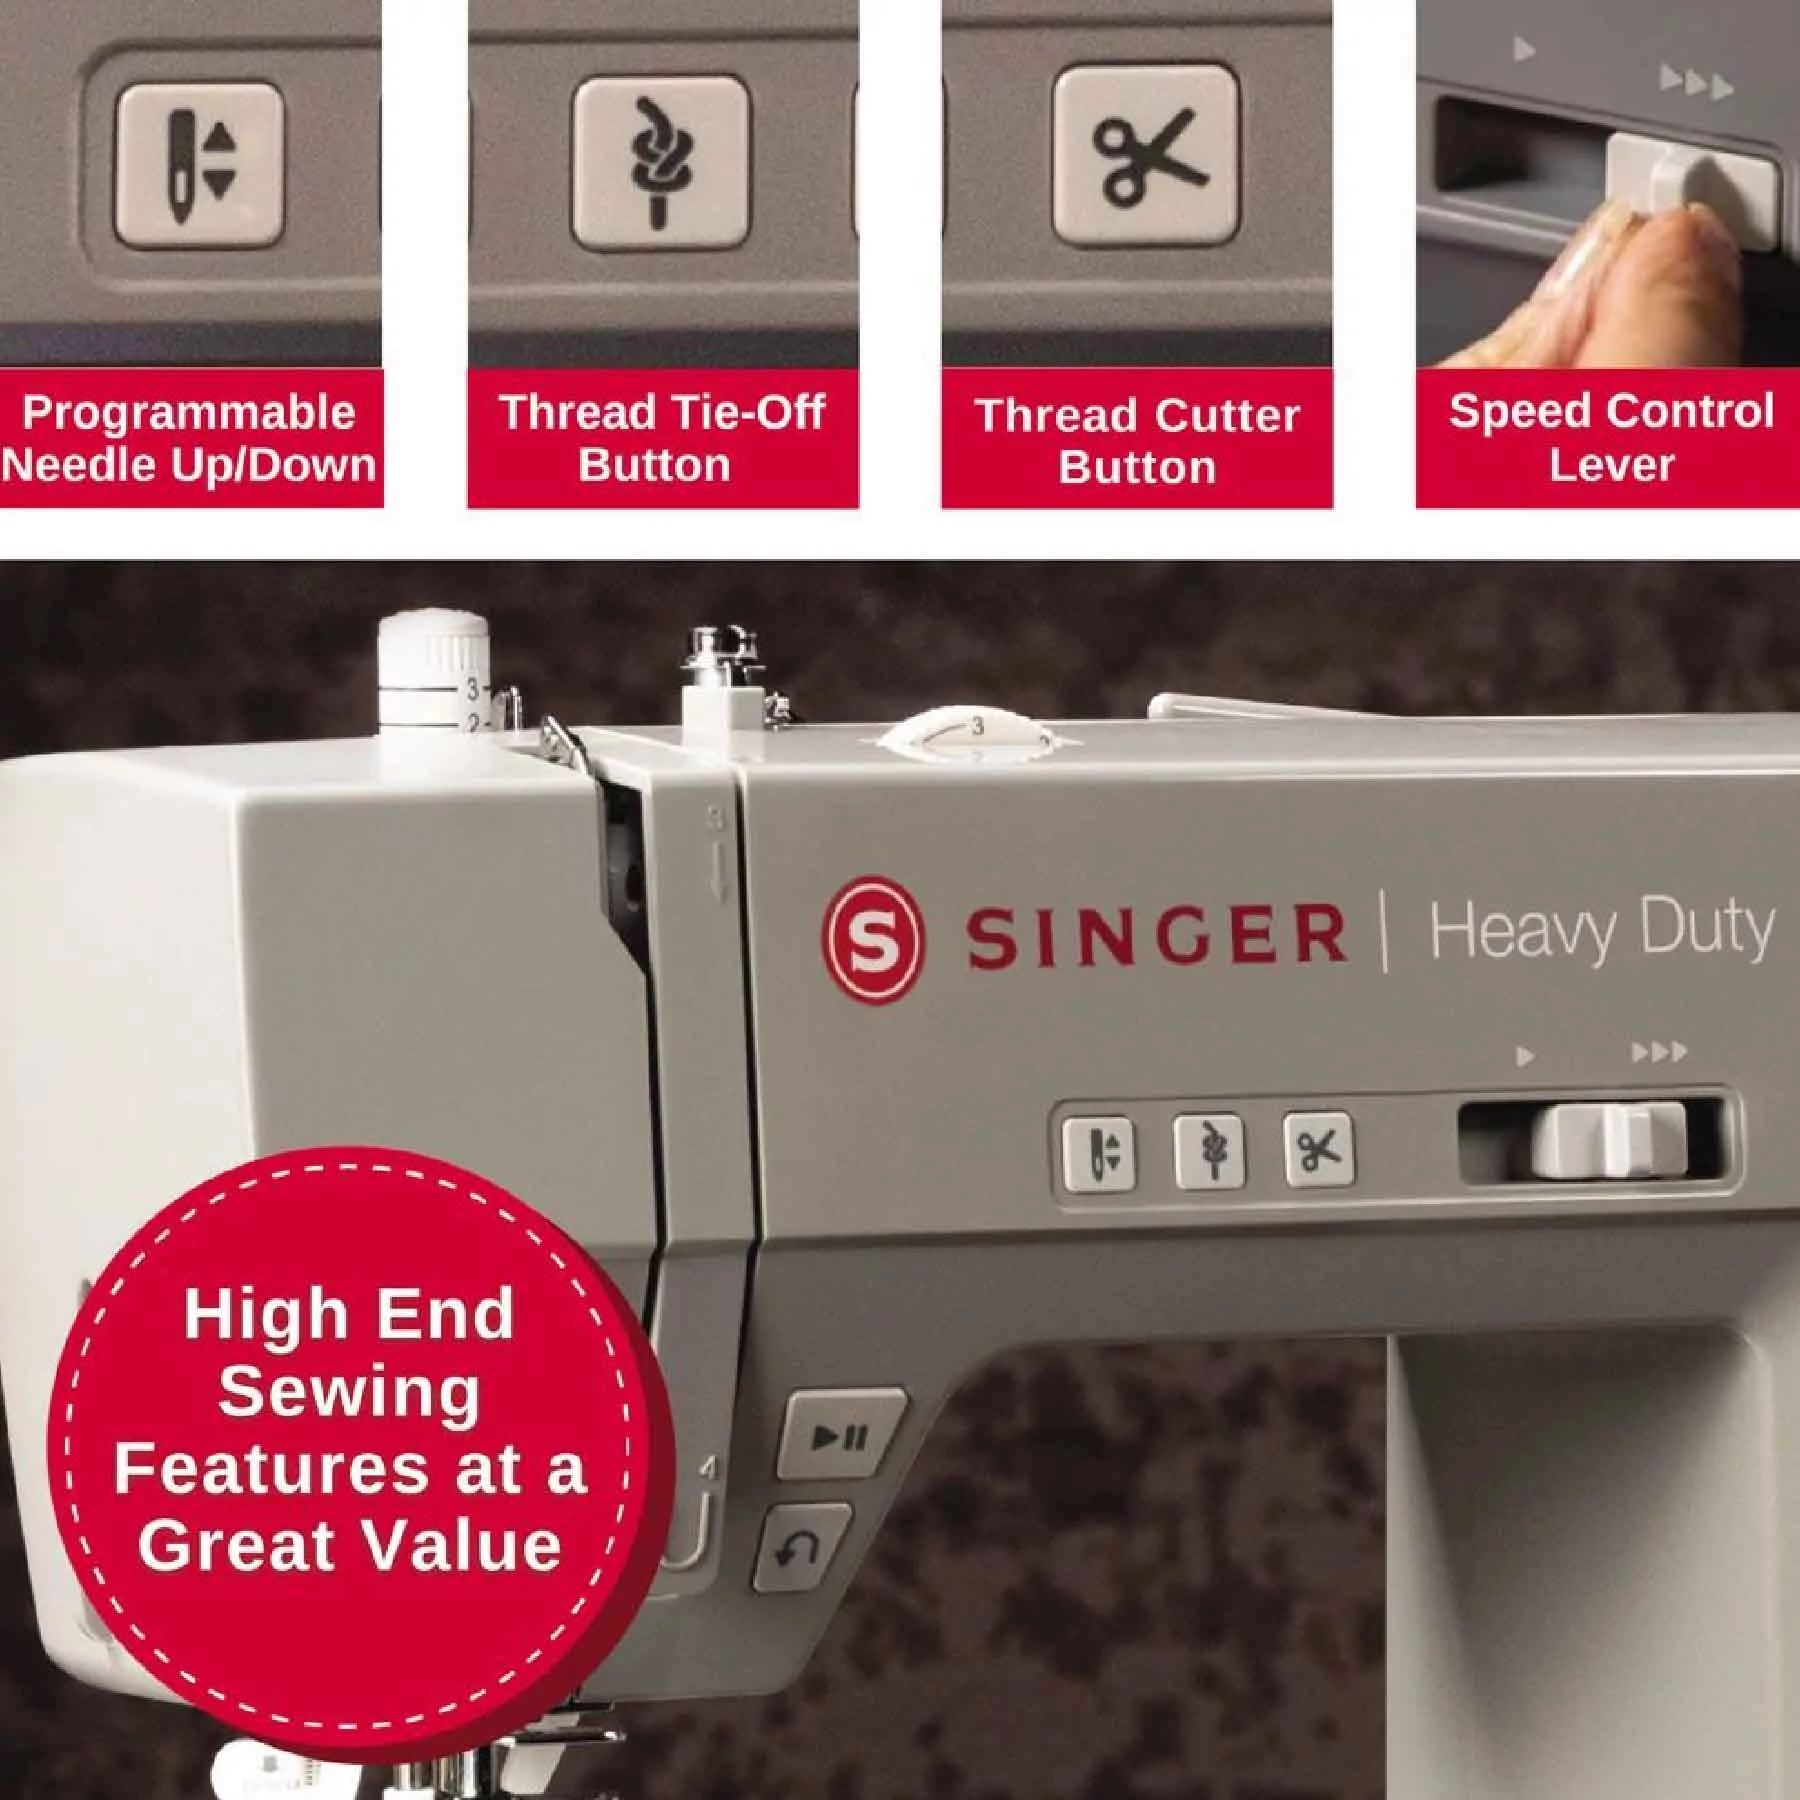 Singer Heavy Duty 6800C computerized sewing machine with text feature callout snippets.